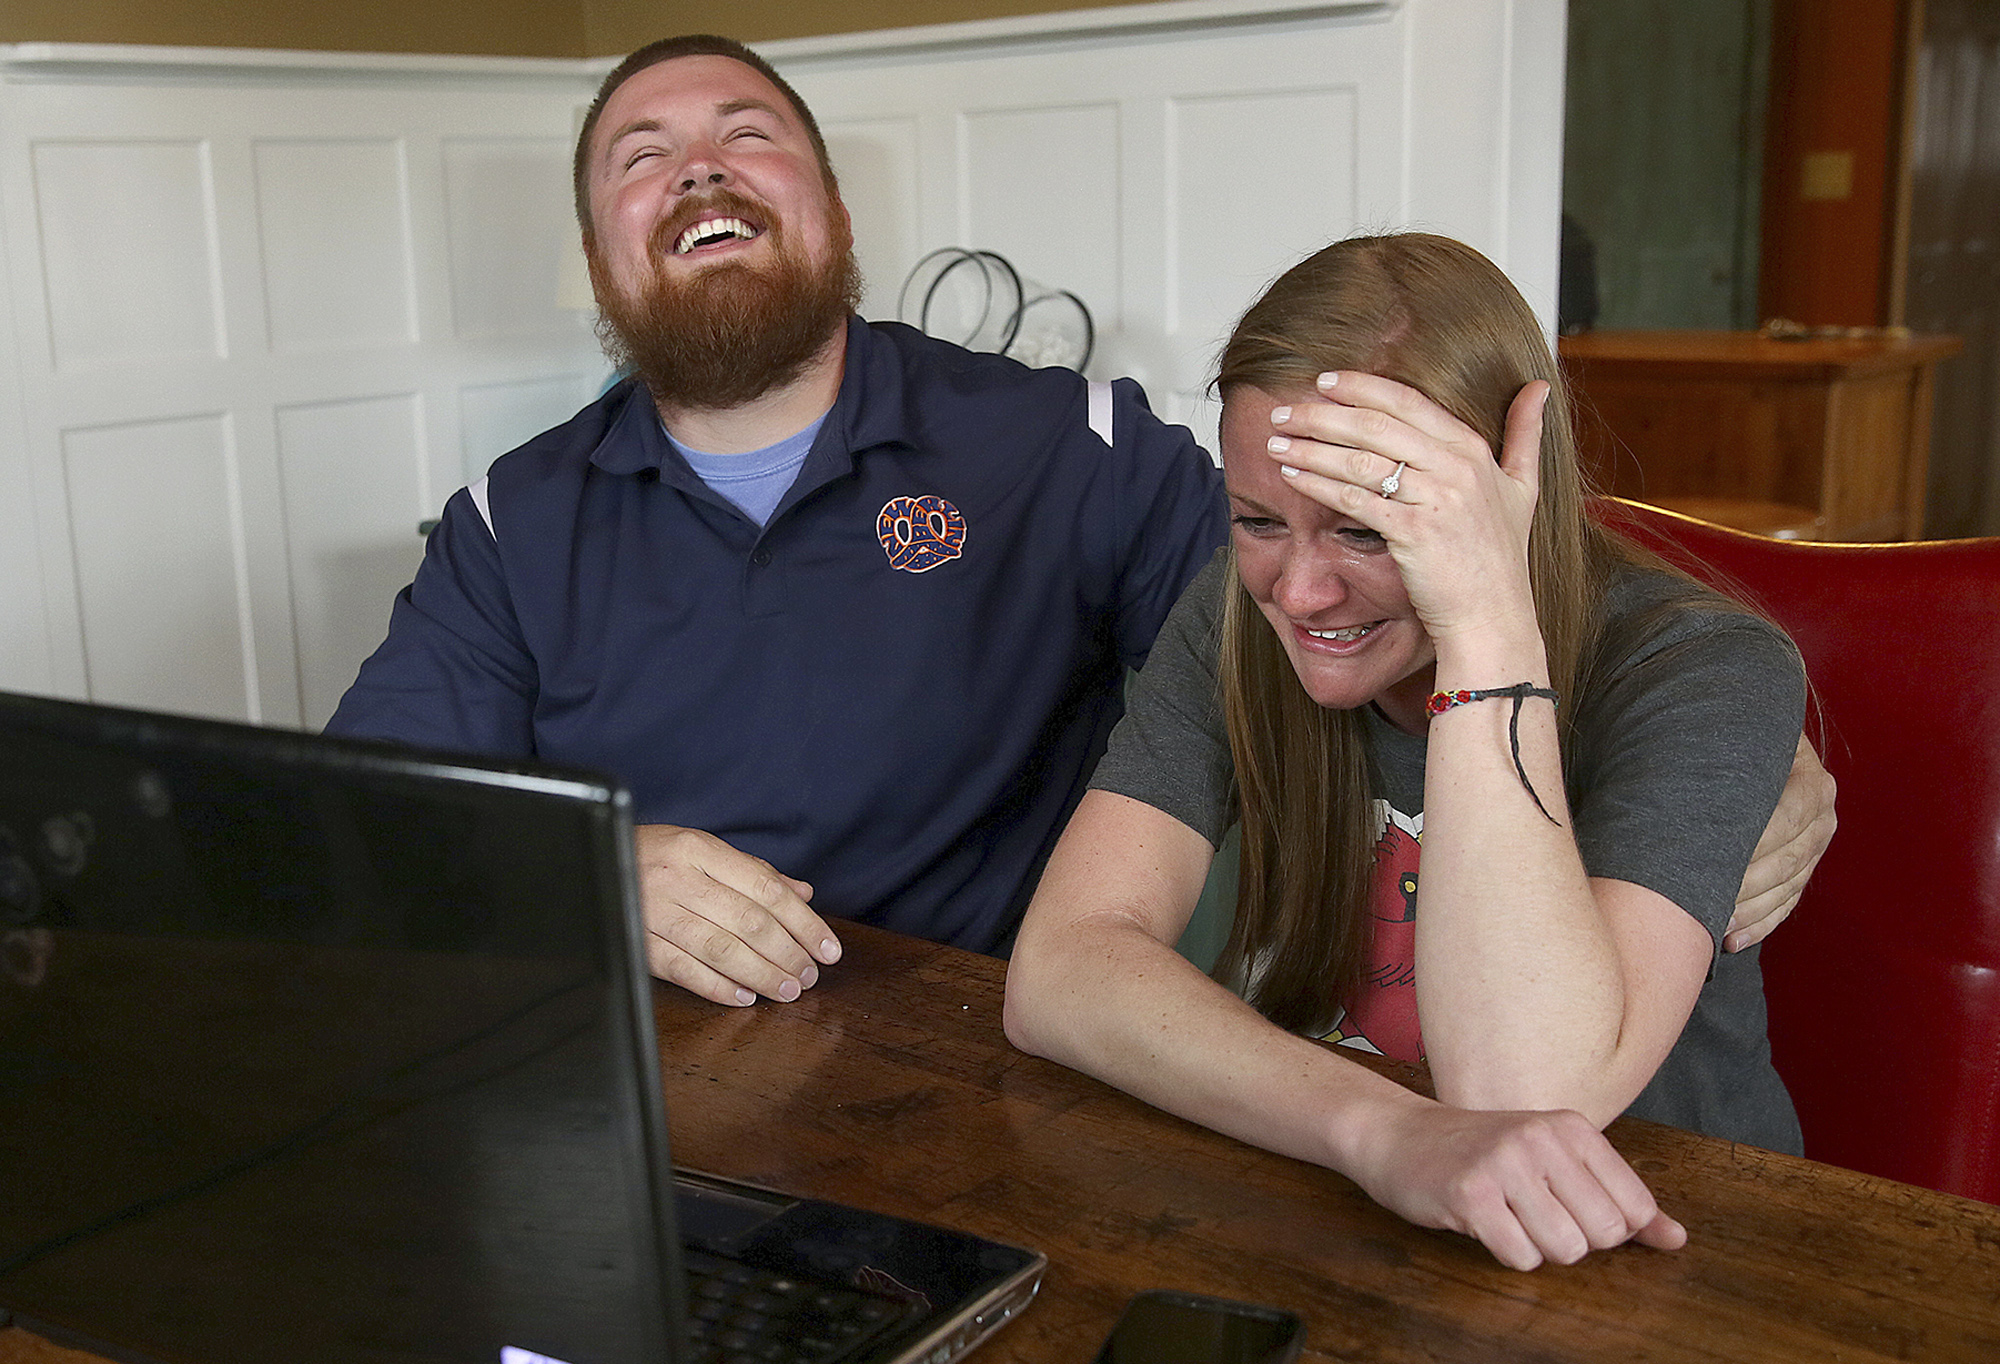 PHOTO: In this Monday, April 6, 2015 photo, Joel Burger and Ashley King react at King?s home in New Berlin, Ill., after learning from a New York public relations firm that Burger King has offered to pay the expenses and provide gifts for their wedding.